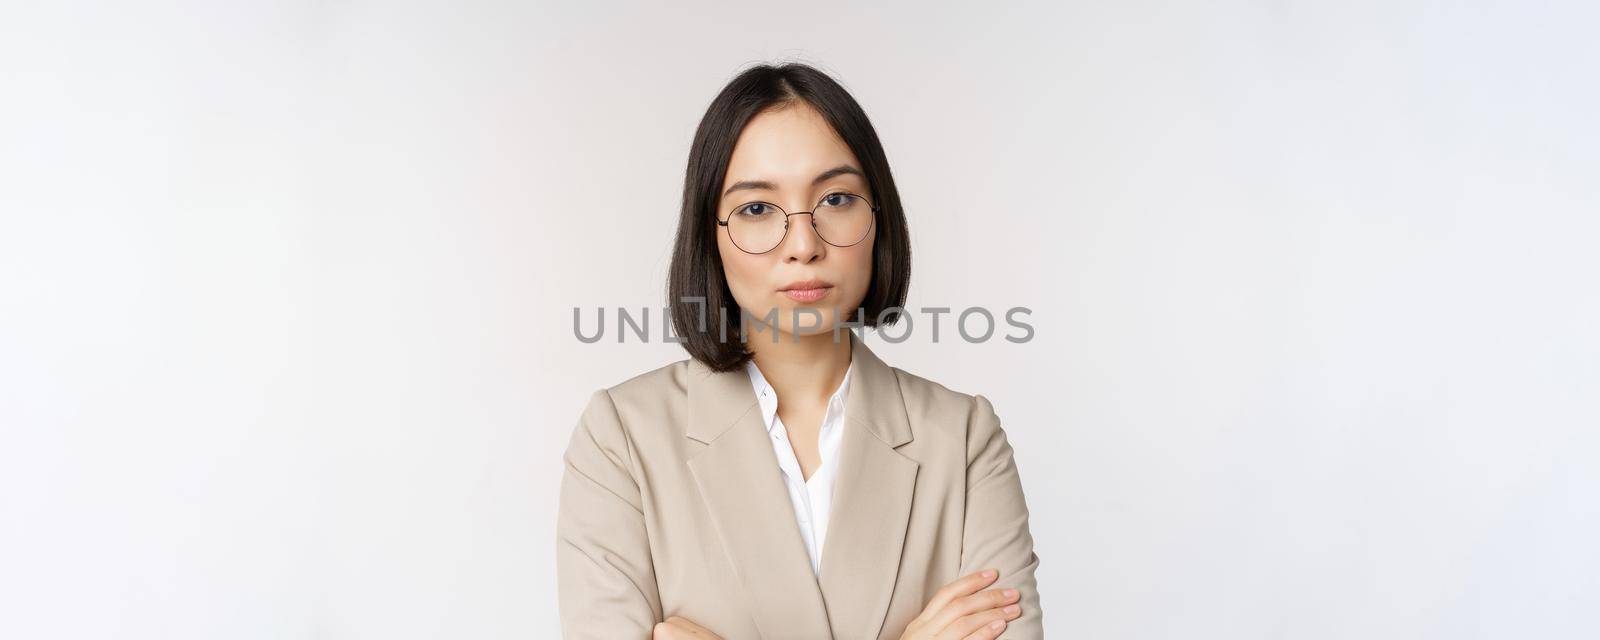 Professional asian businesswoman in glasses, looking confident at camera, standing in power pose against white background.